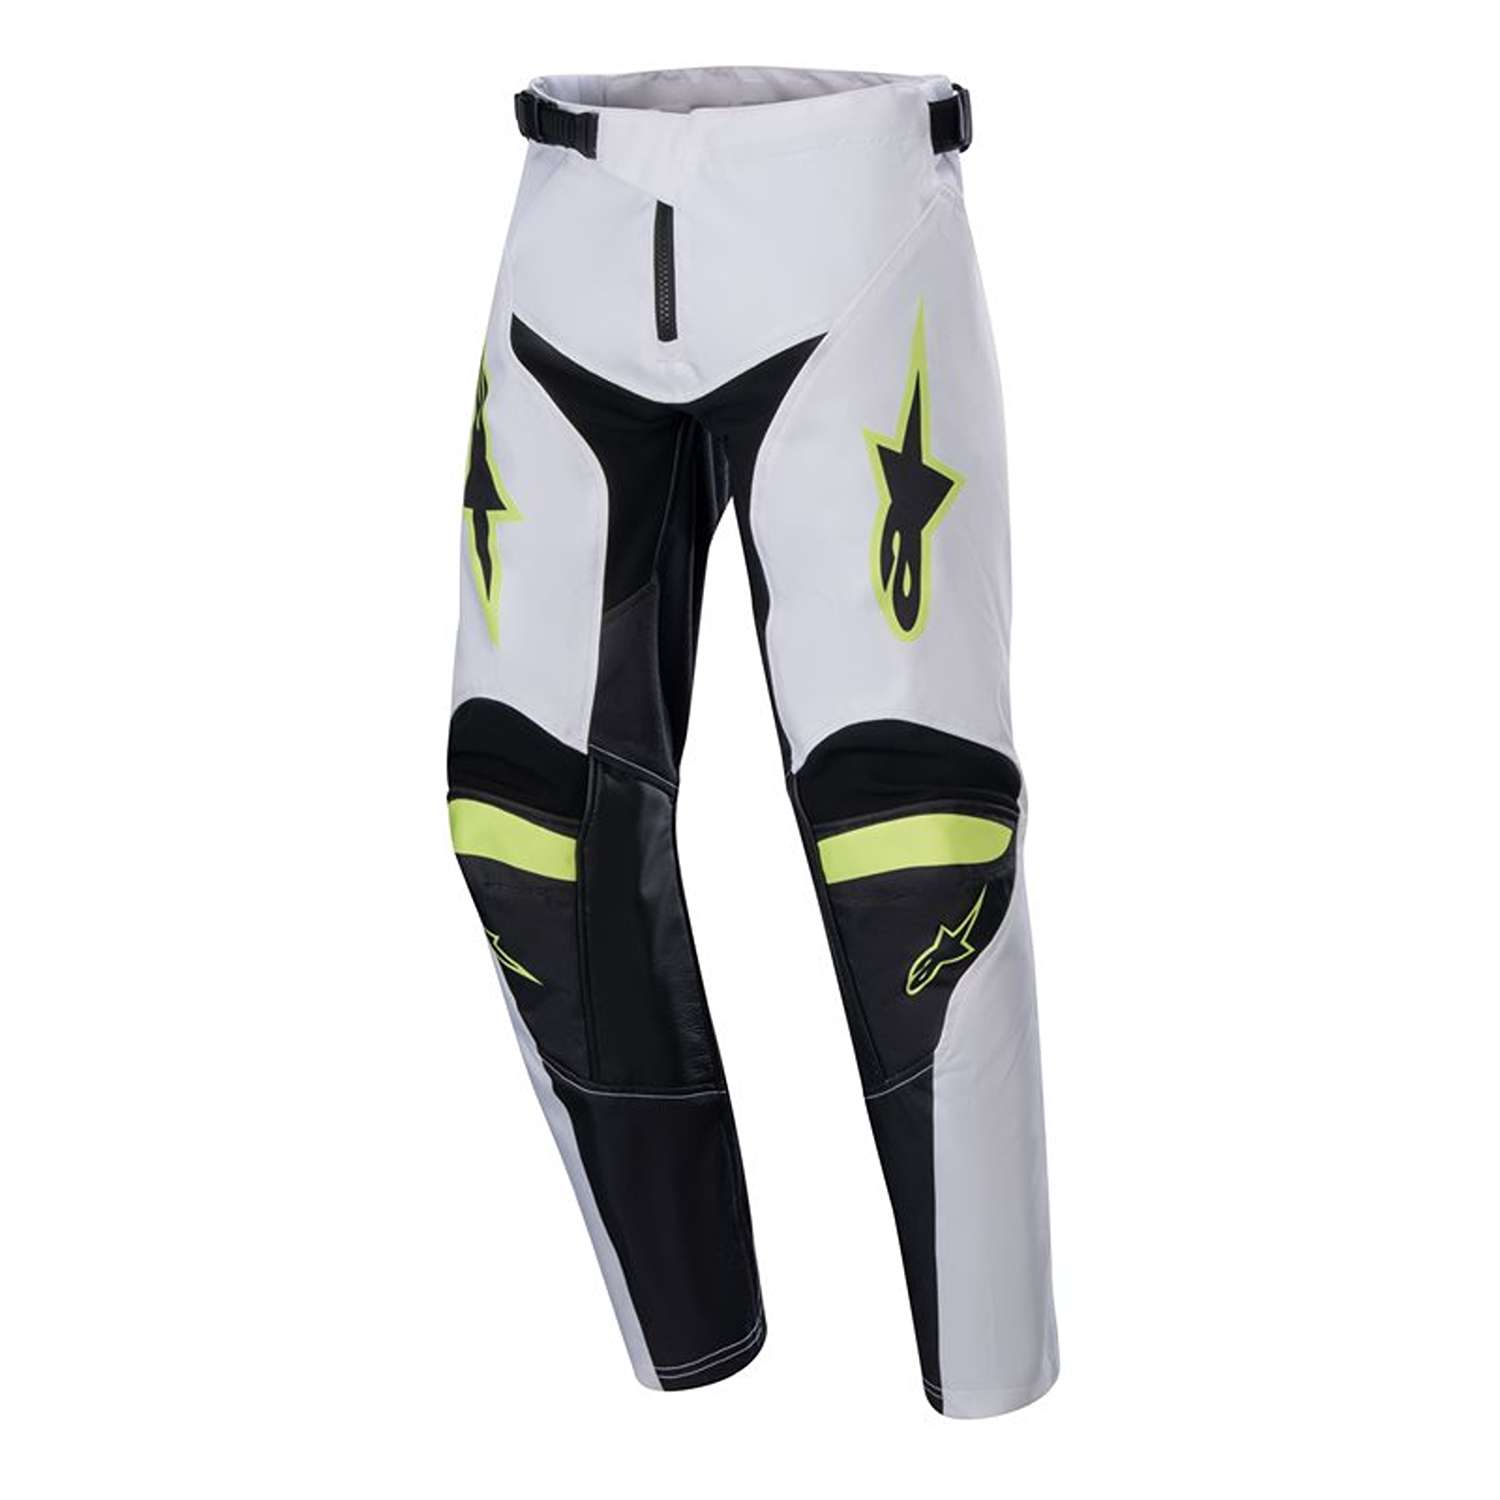 Image of Alpinestars Youth Racer Lucent Pants White Neon Red Yellow Fluo Size 28 ID 8059347267494